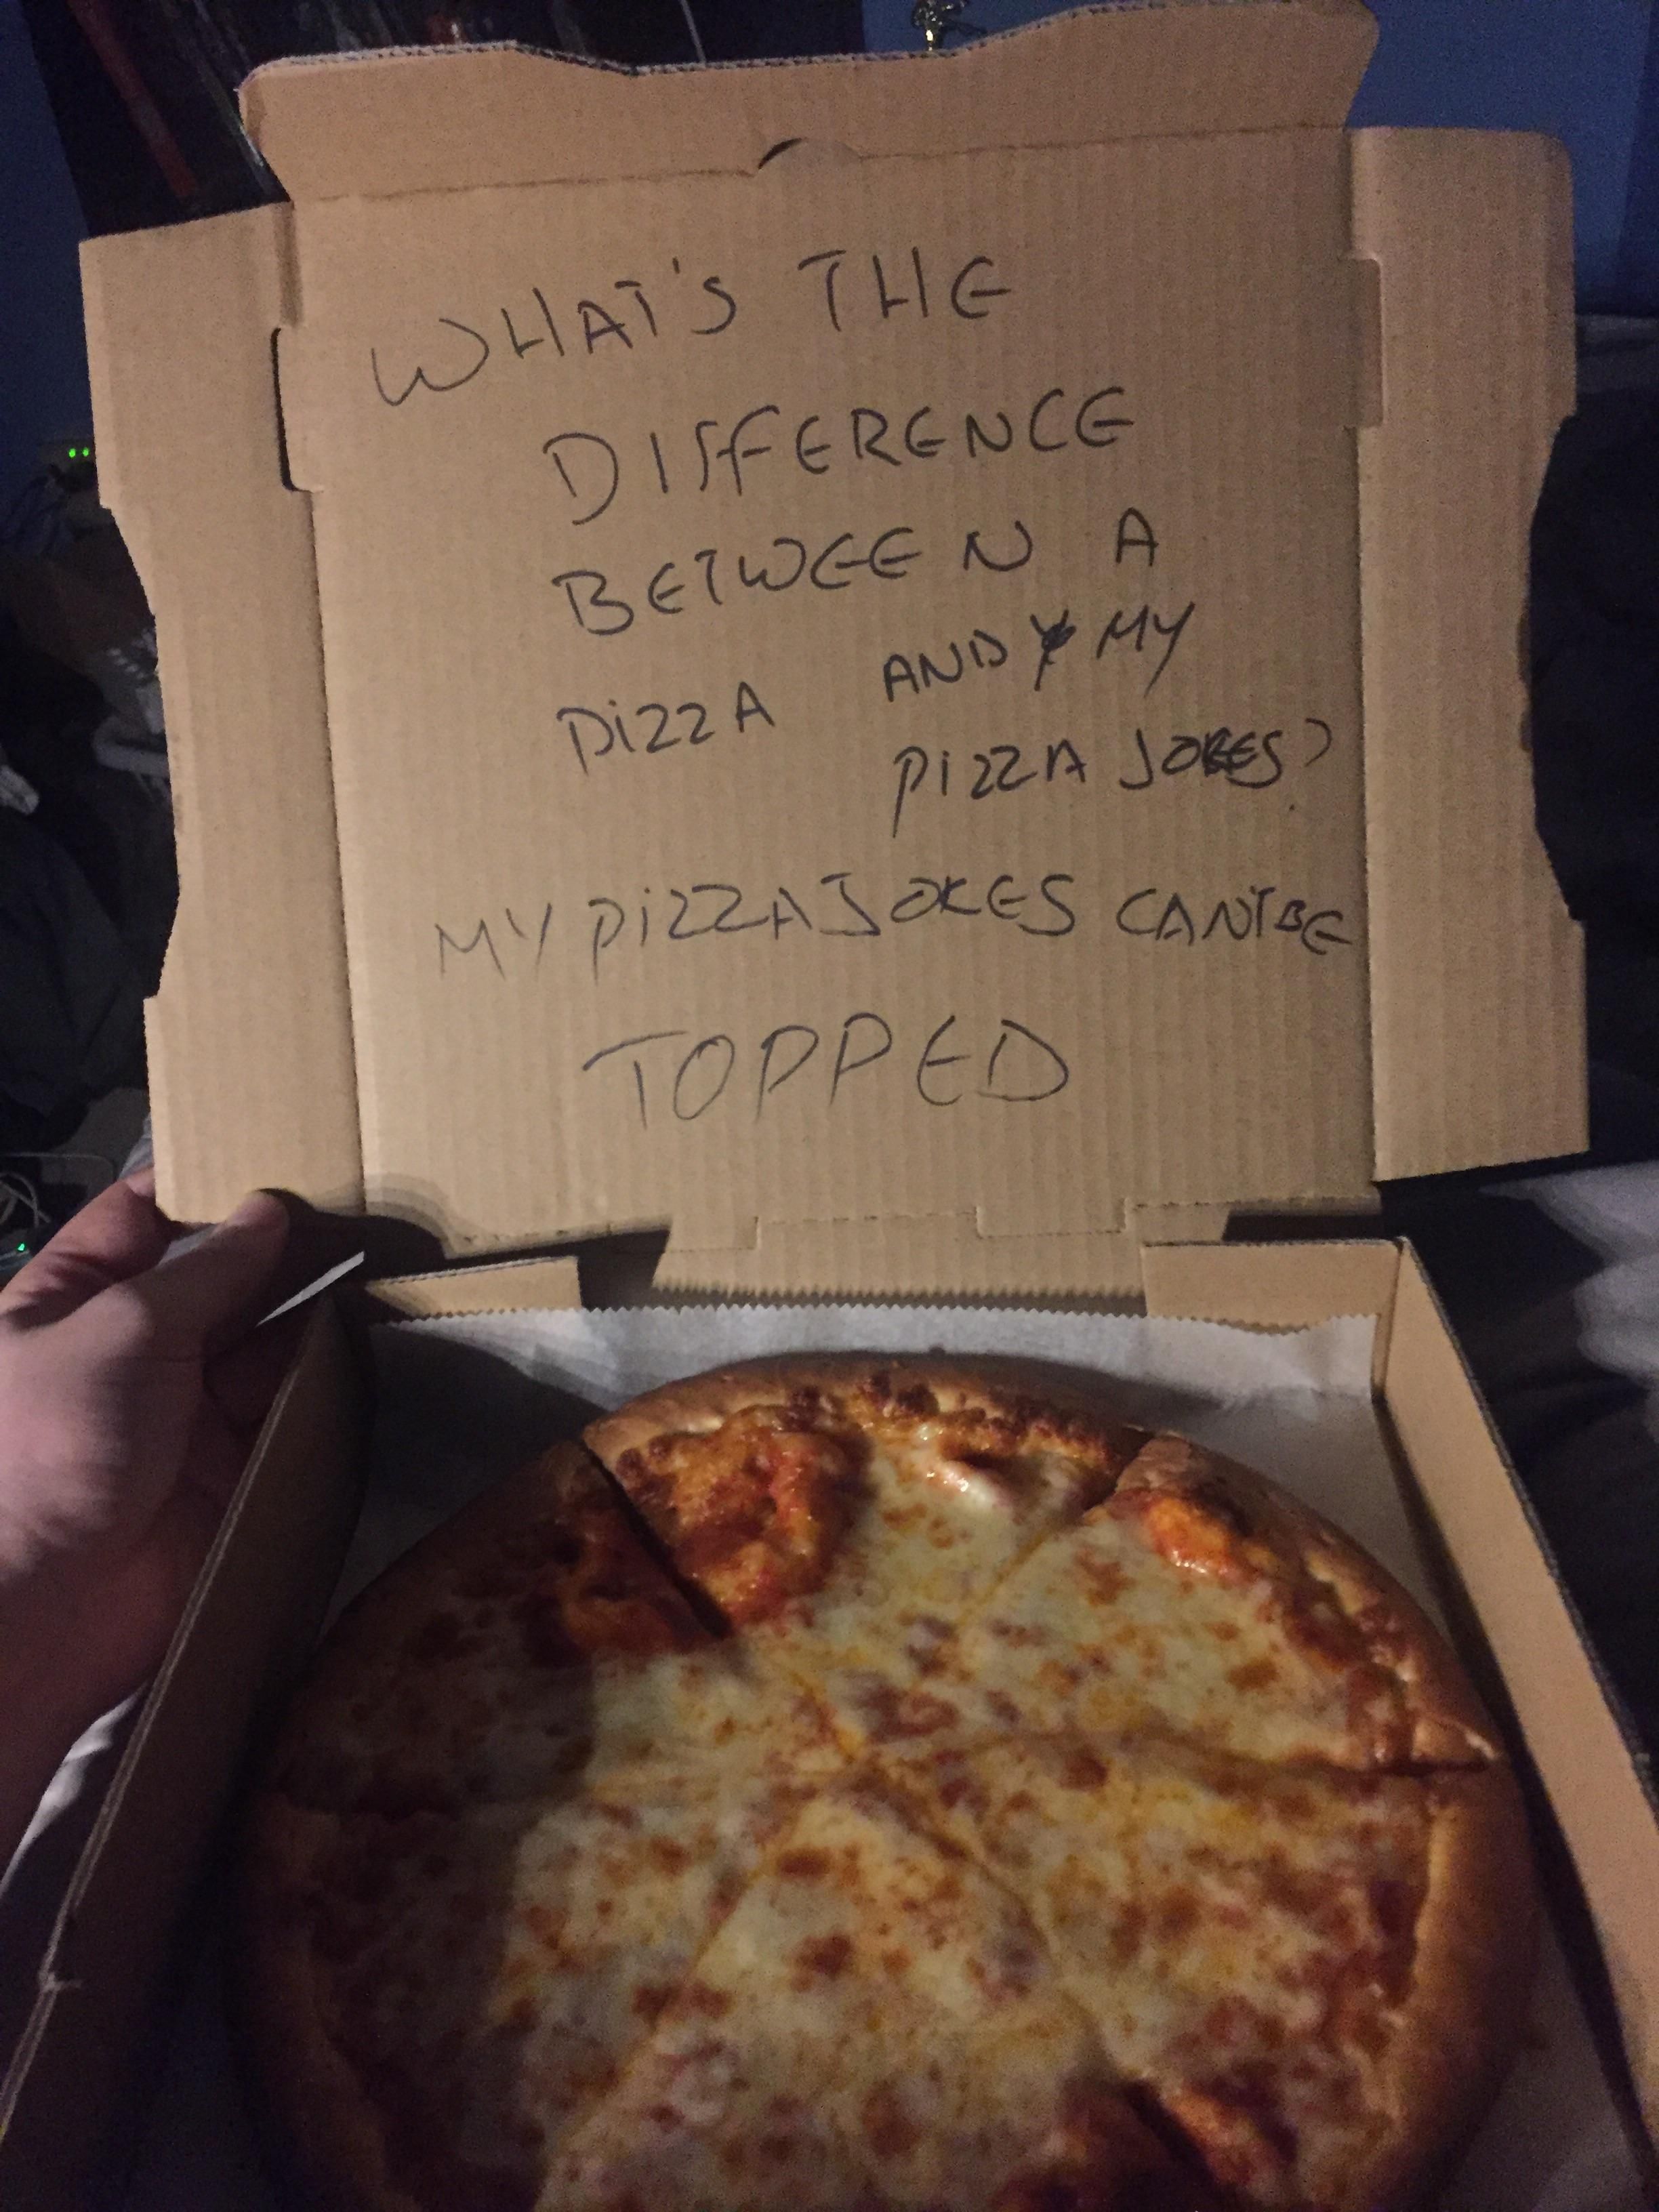 I told the guy who wrote the pizza joke in my last post that he got me a ton of Internet points, he sent this back